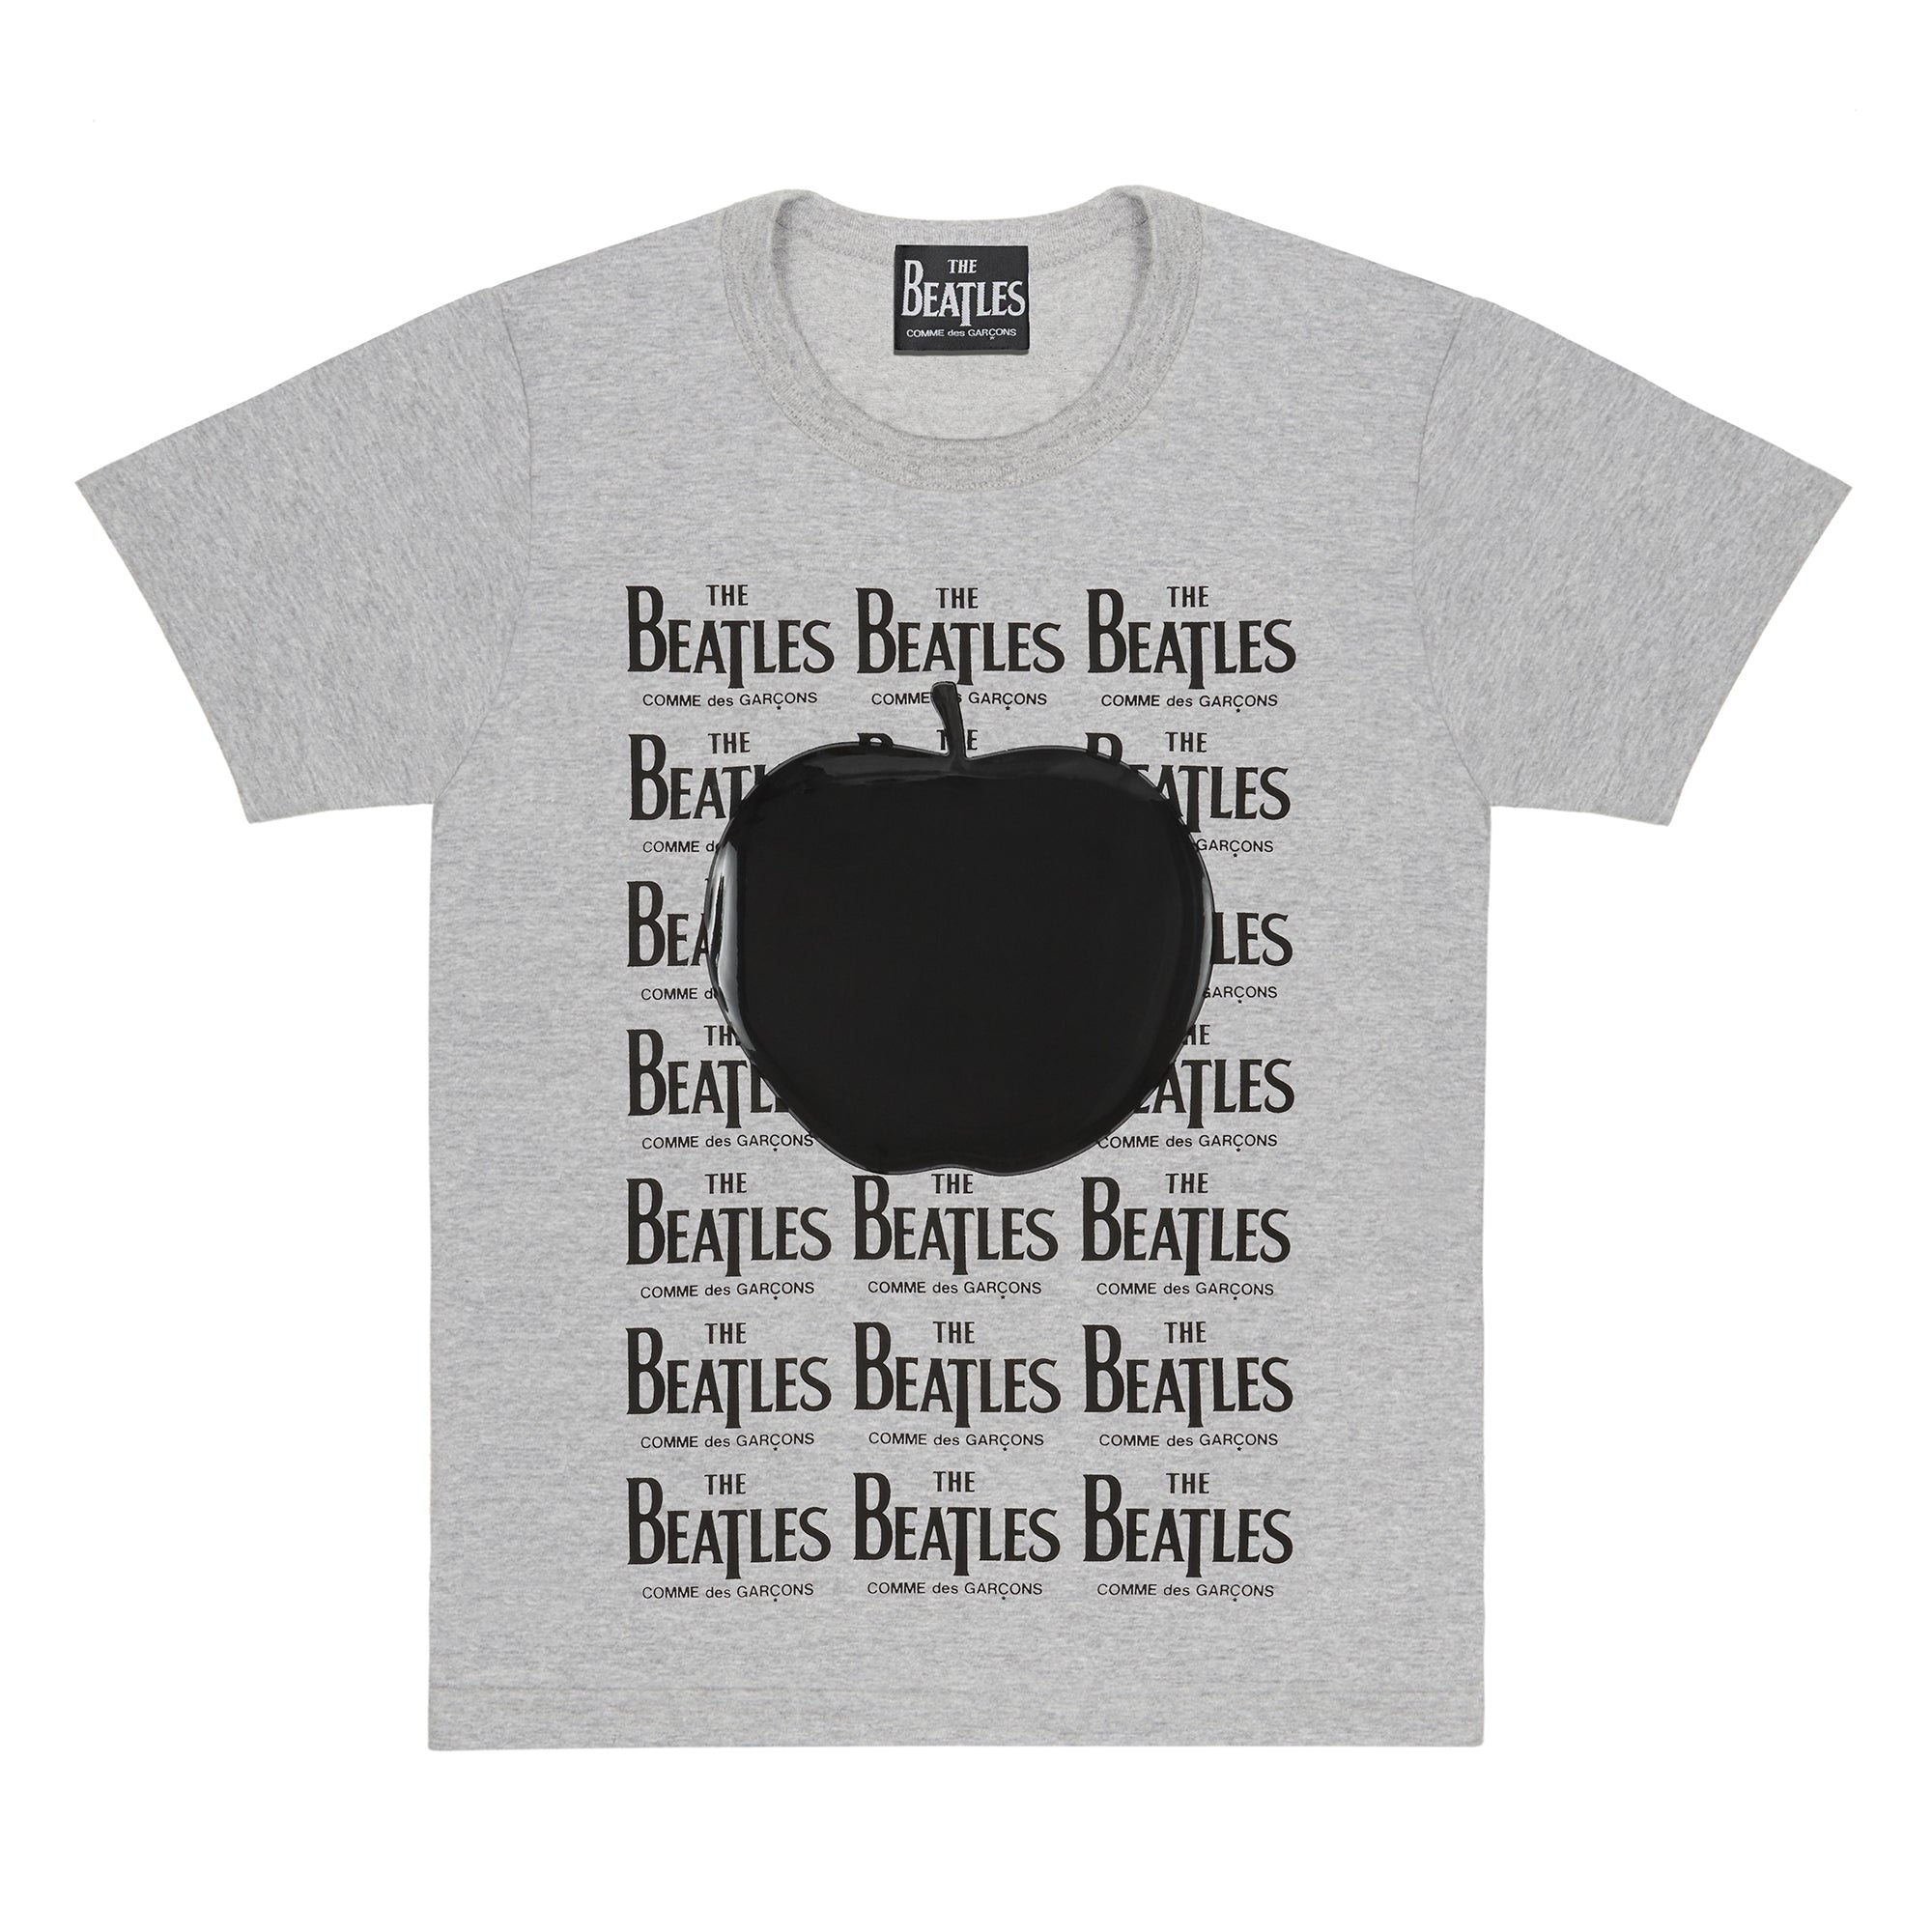 The Beatles CDG - Rubber Printed T-Shirt Grey - (VT-T003-051) view 1